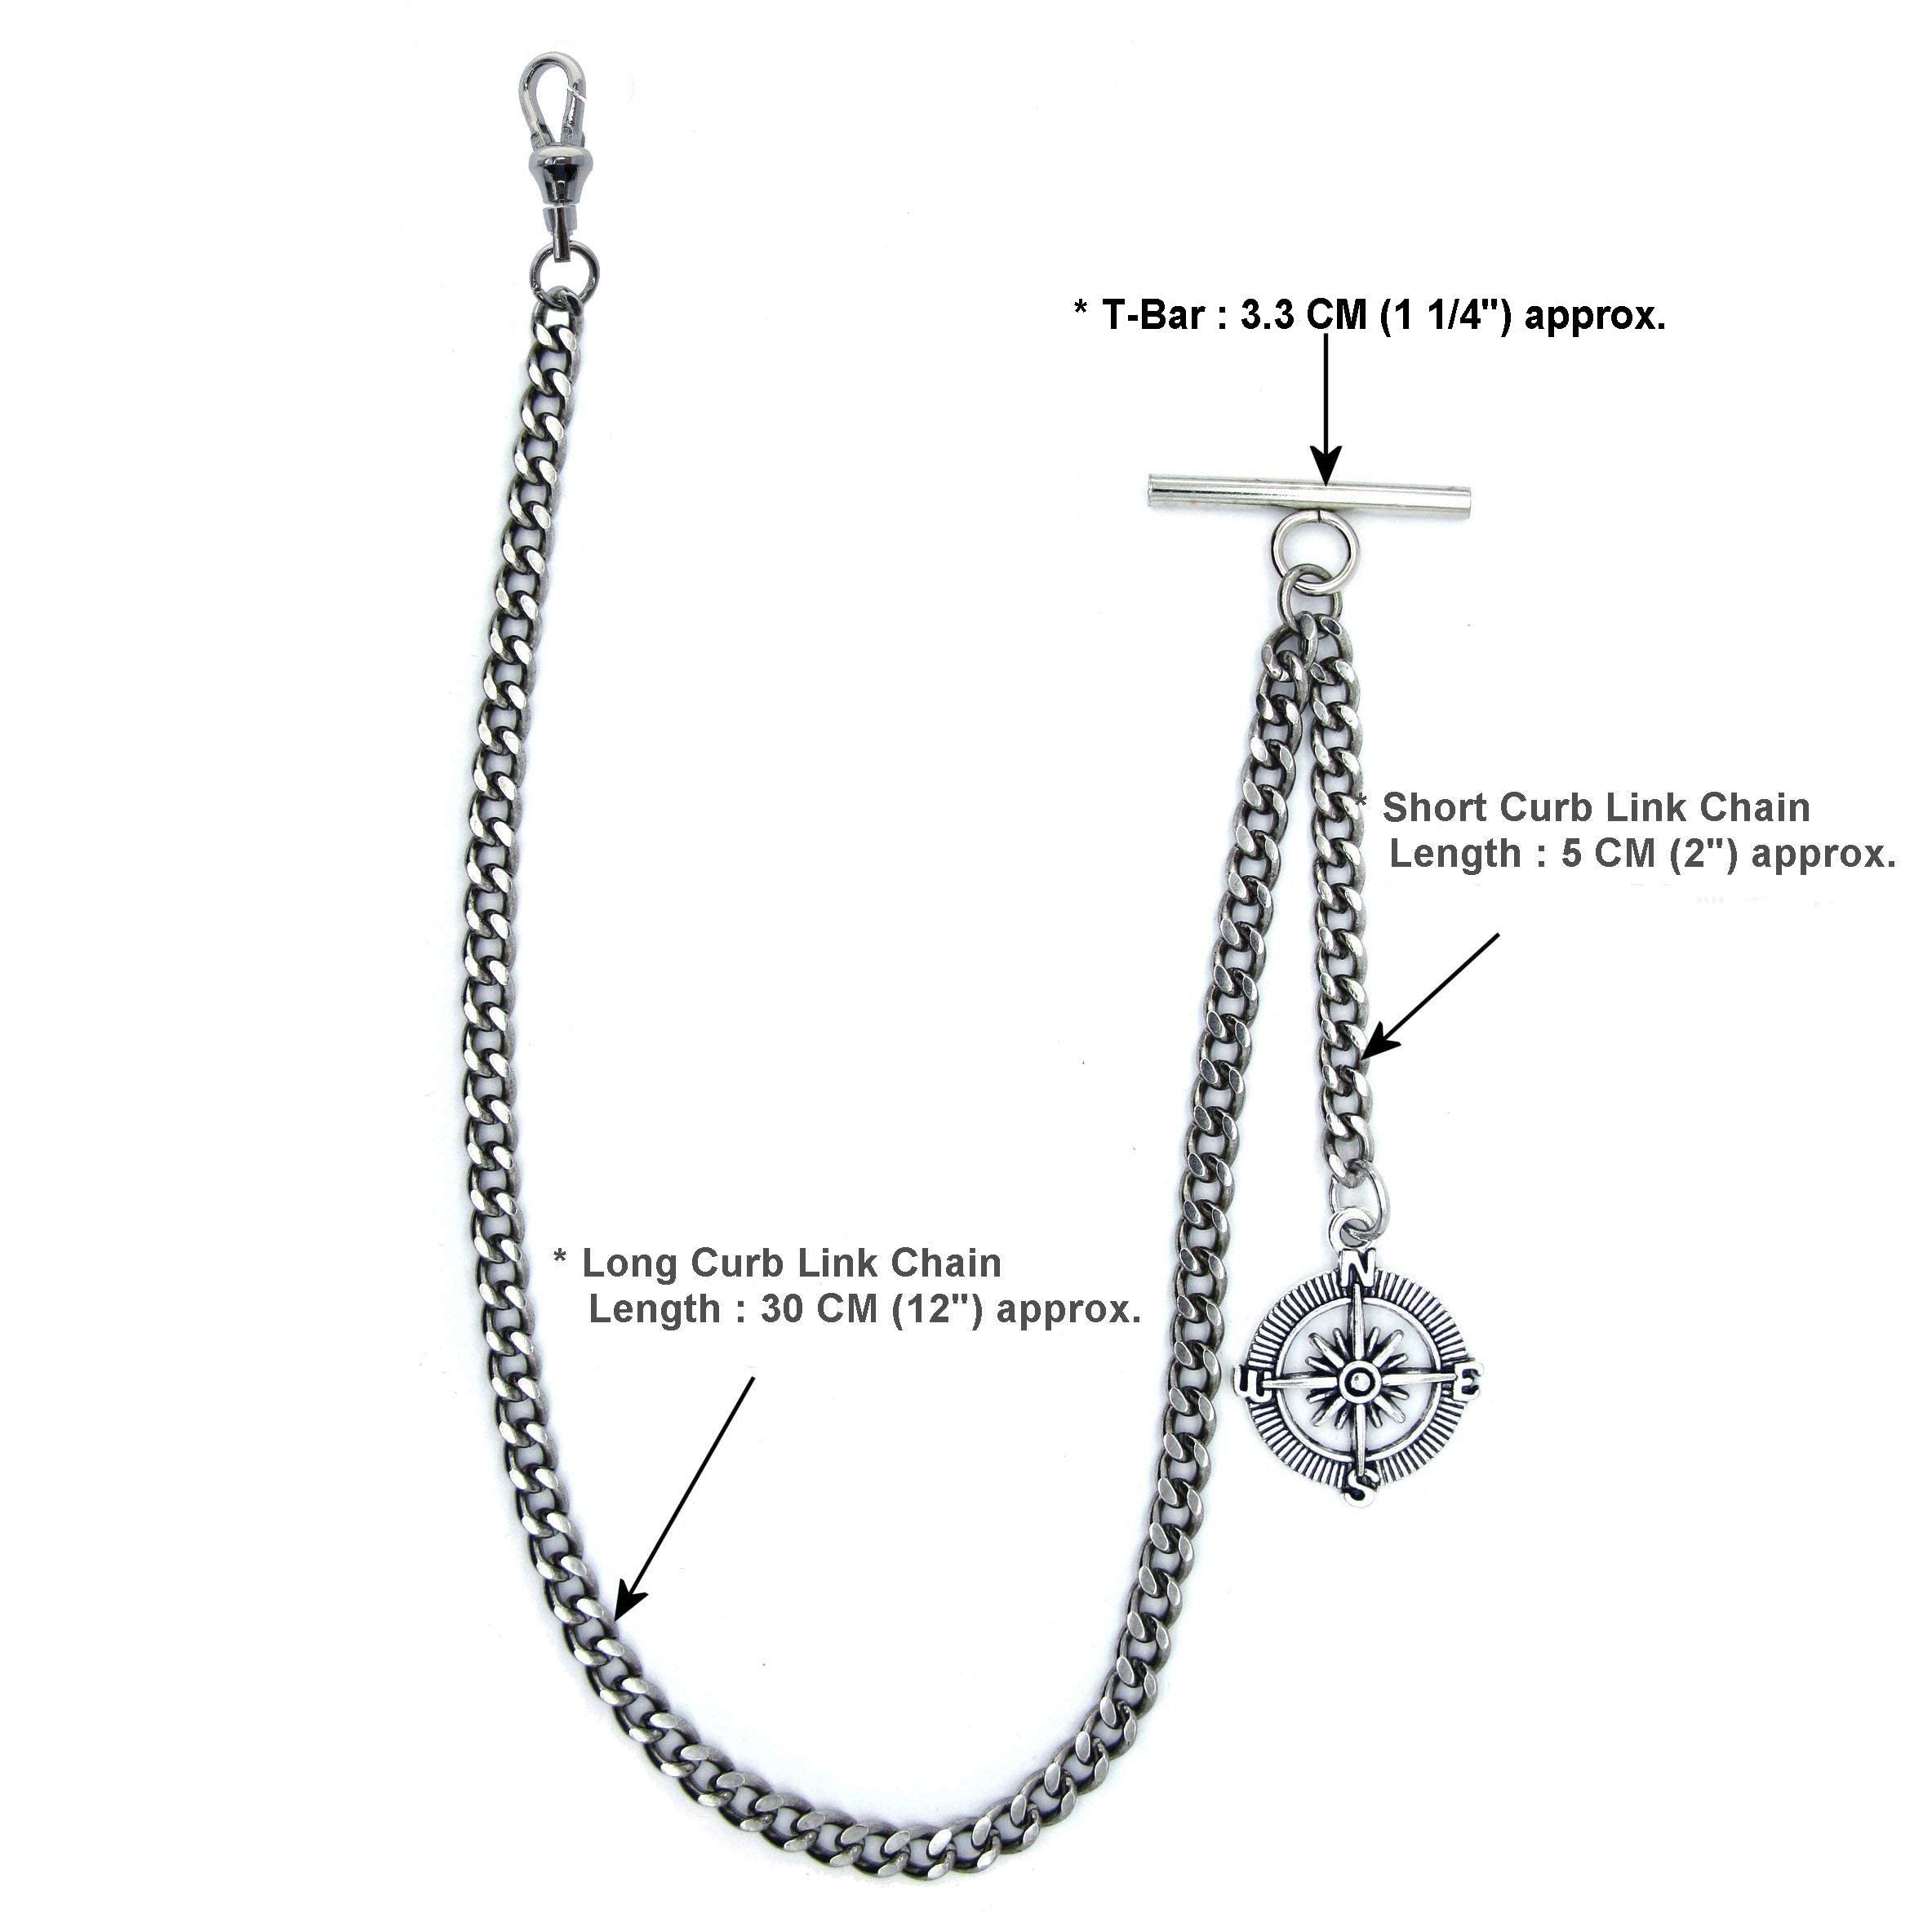 watchvshop Albert Chain Silver Tone Pocket Watch Chain Vest Chain for Men Compass Design Charm Fob T Bar with Swivel Clasp AC55A